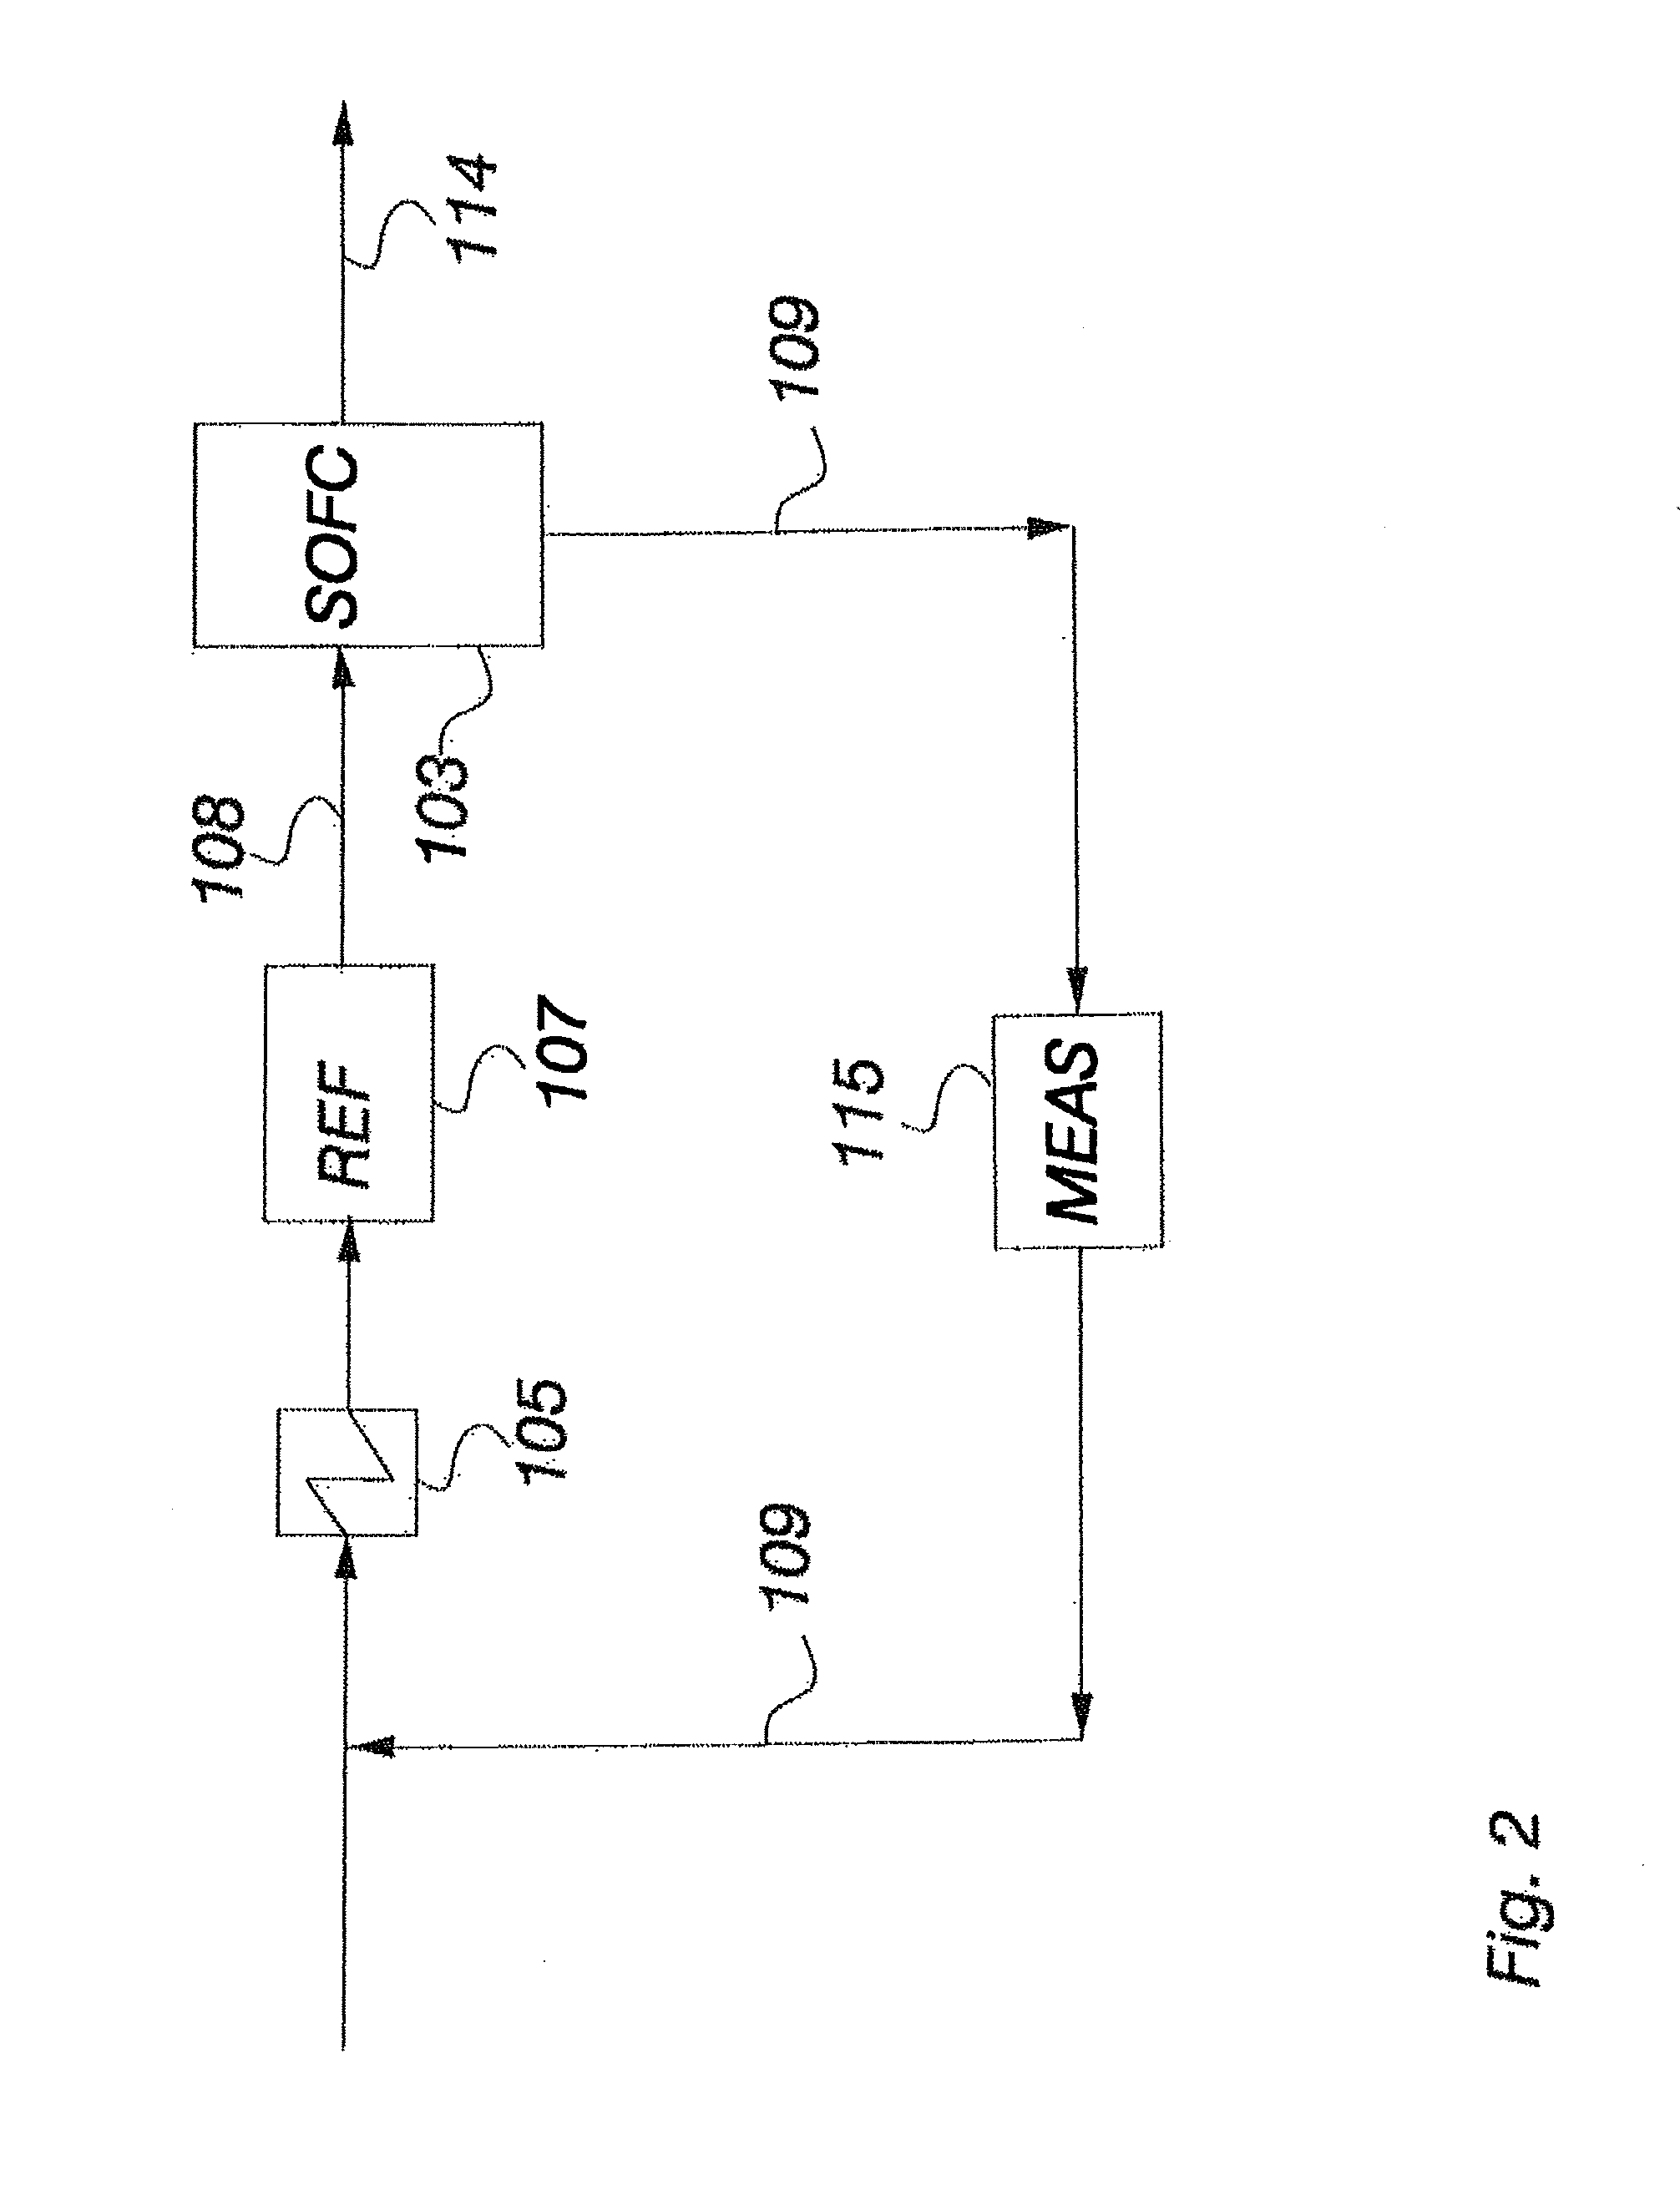 Recirculation arrangement and method for a high temperature cell system